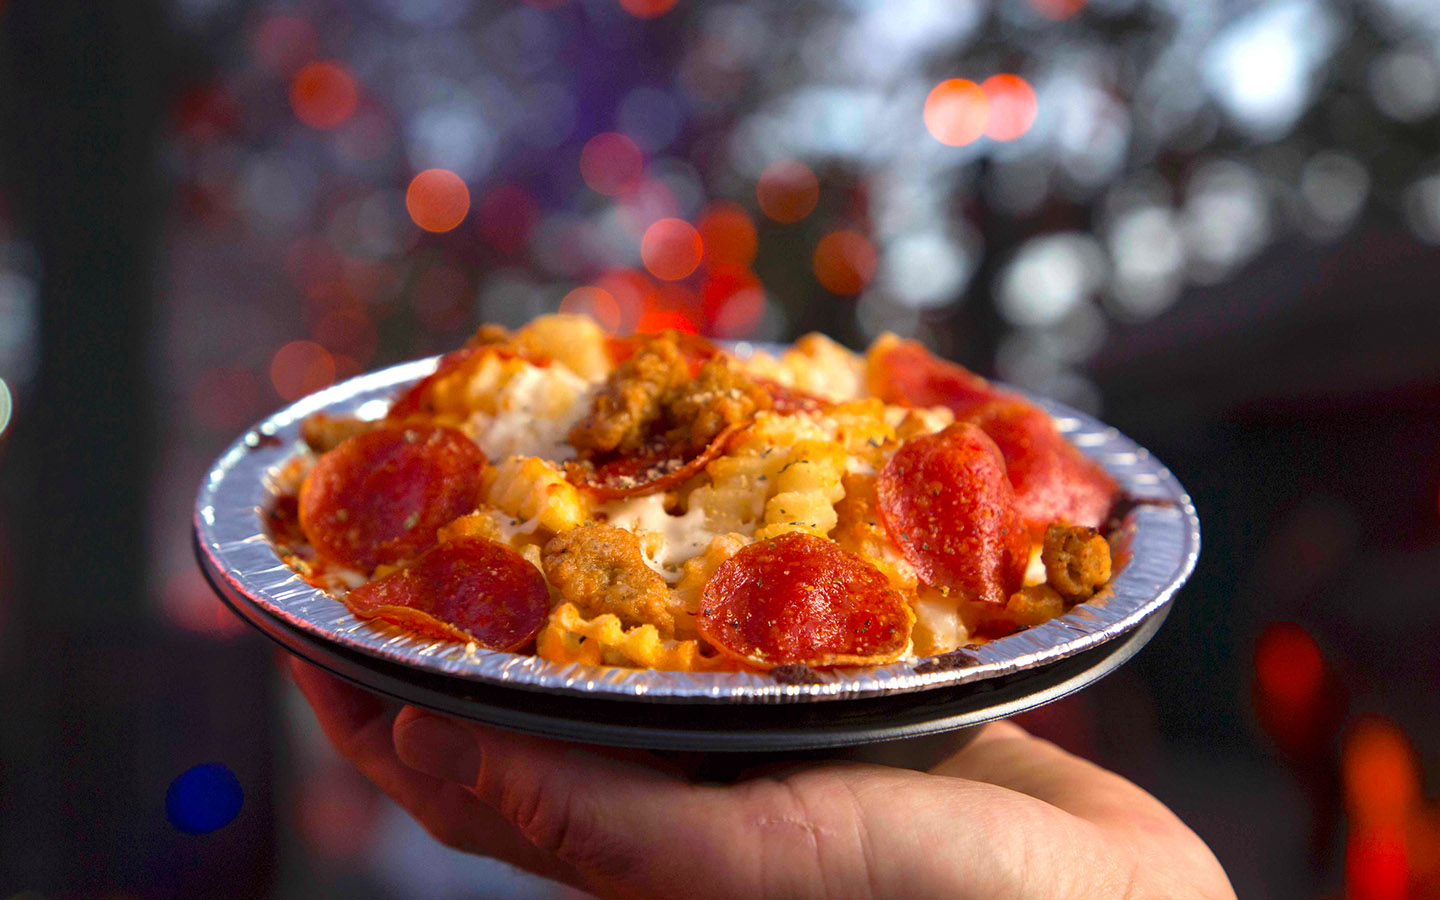 Pizza Fries at Universal's Halloween Horror Nights